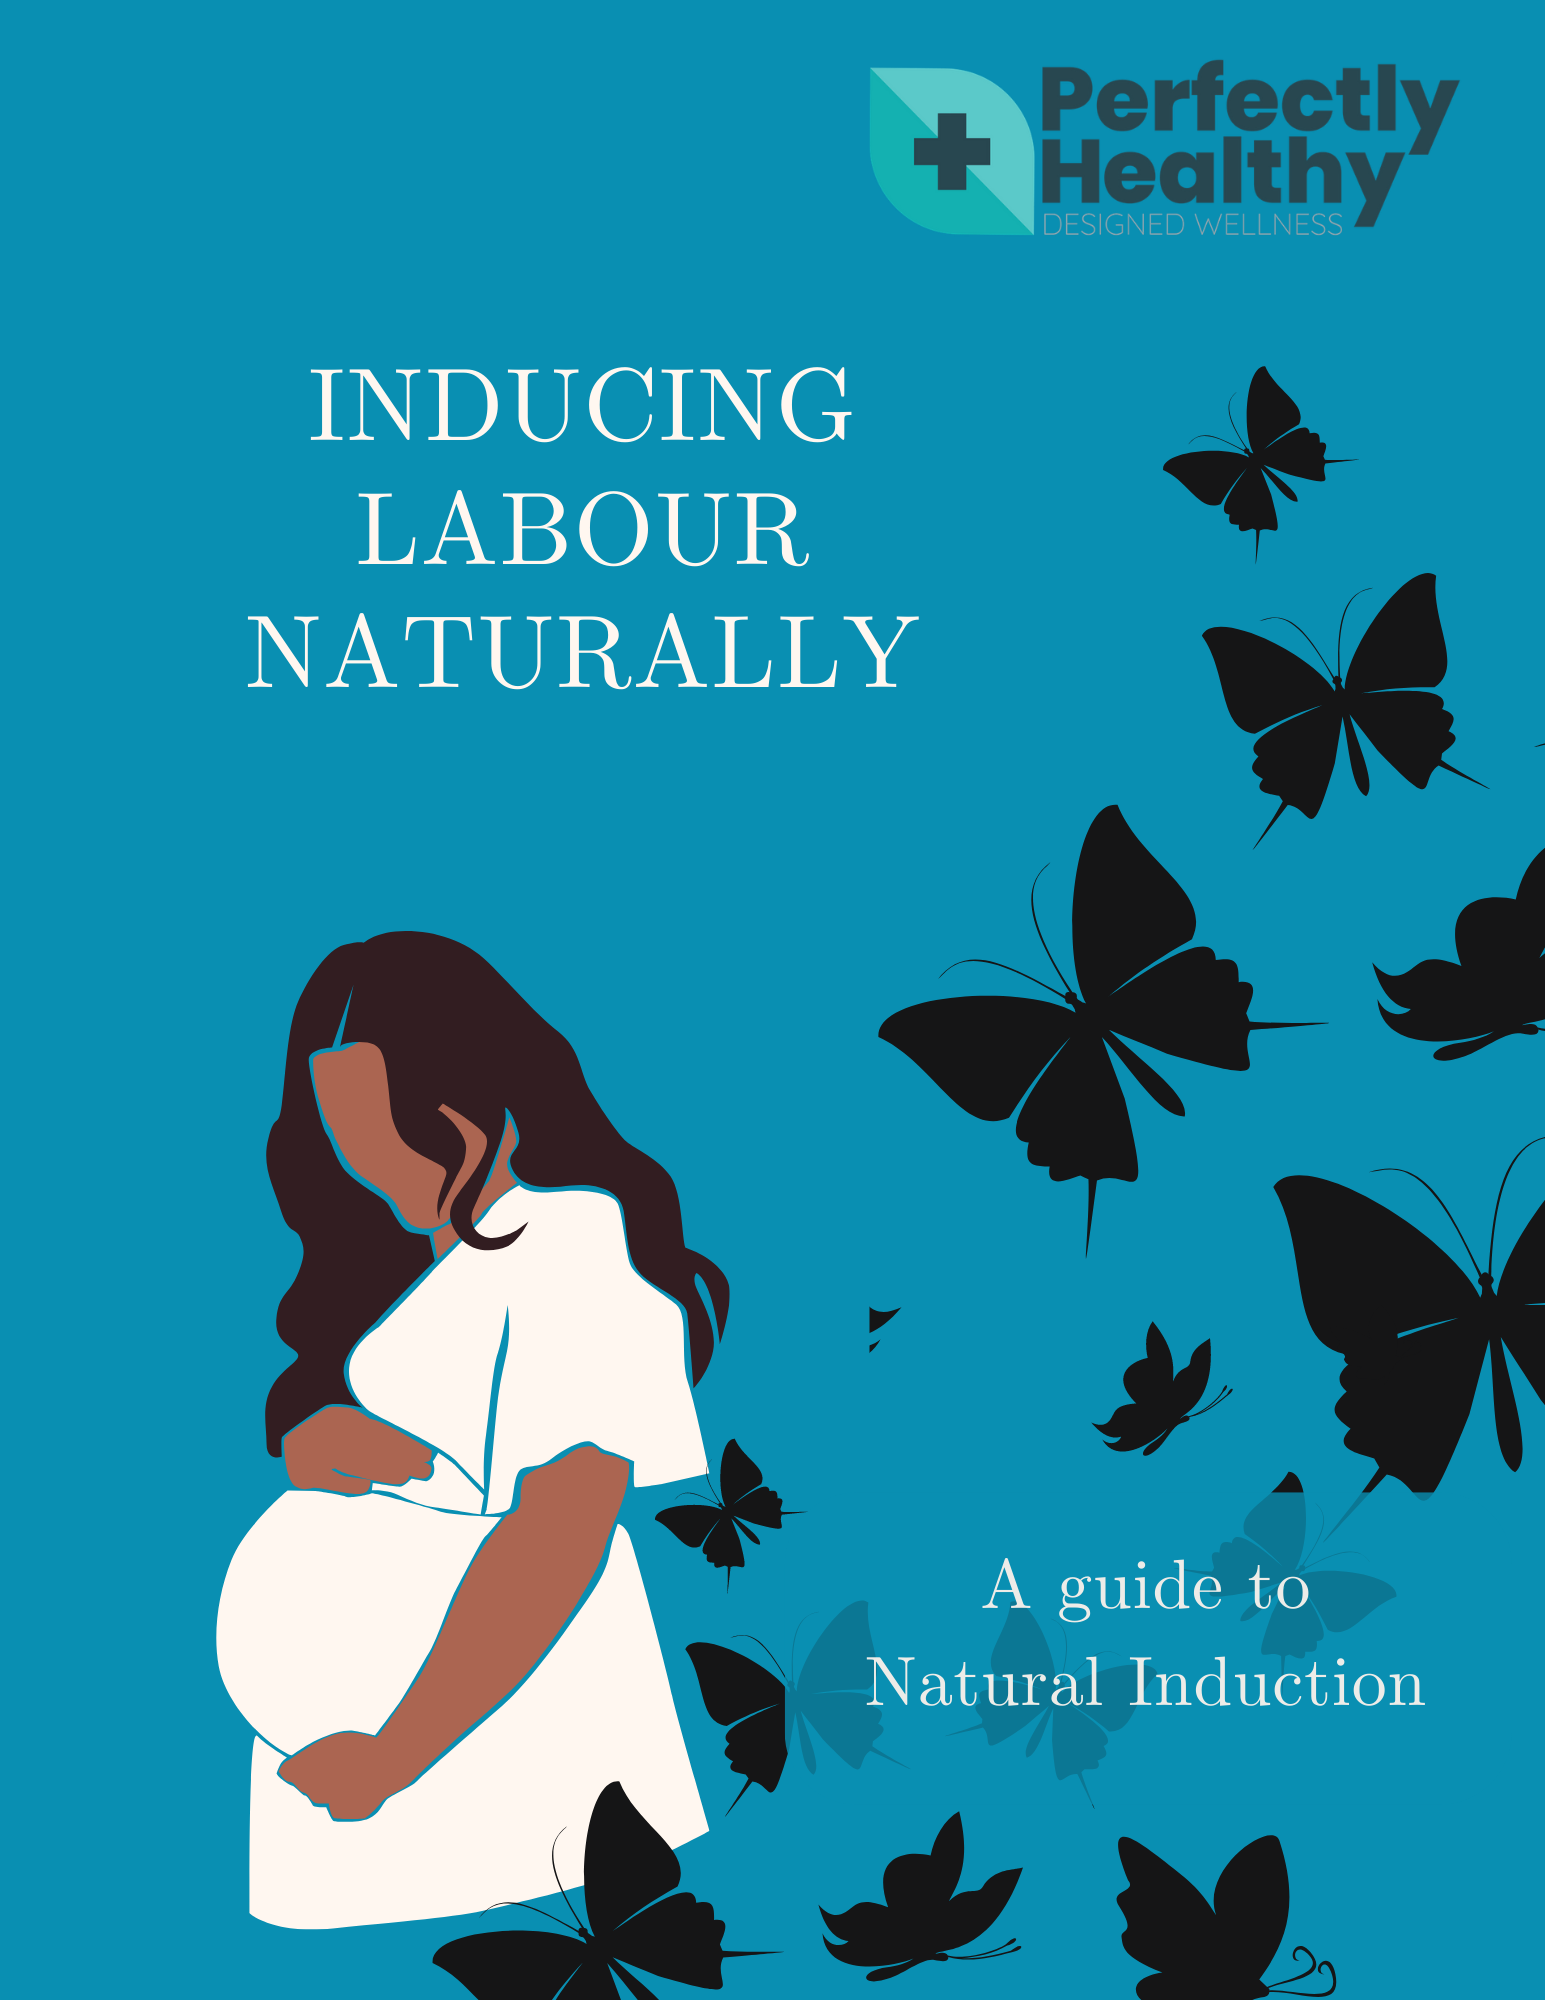 Inducing labour naturally - A guide to Natural Induction (eBook)